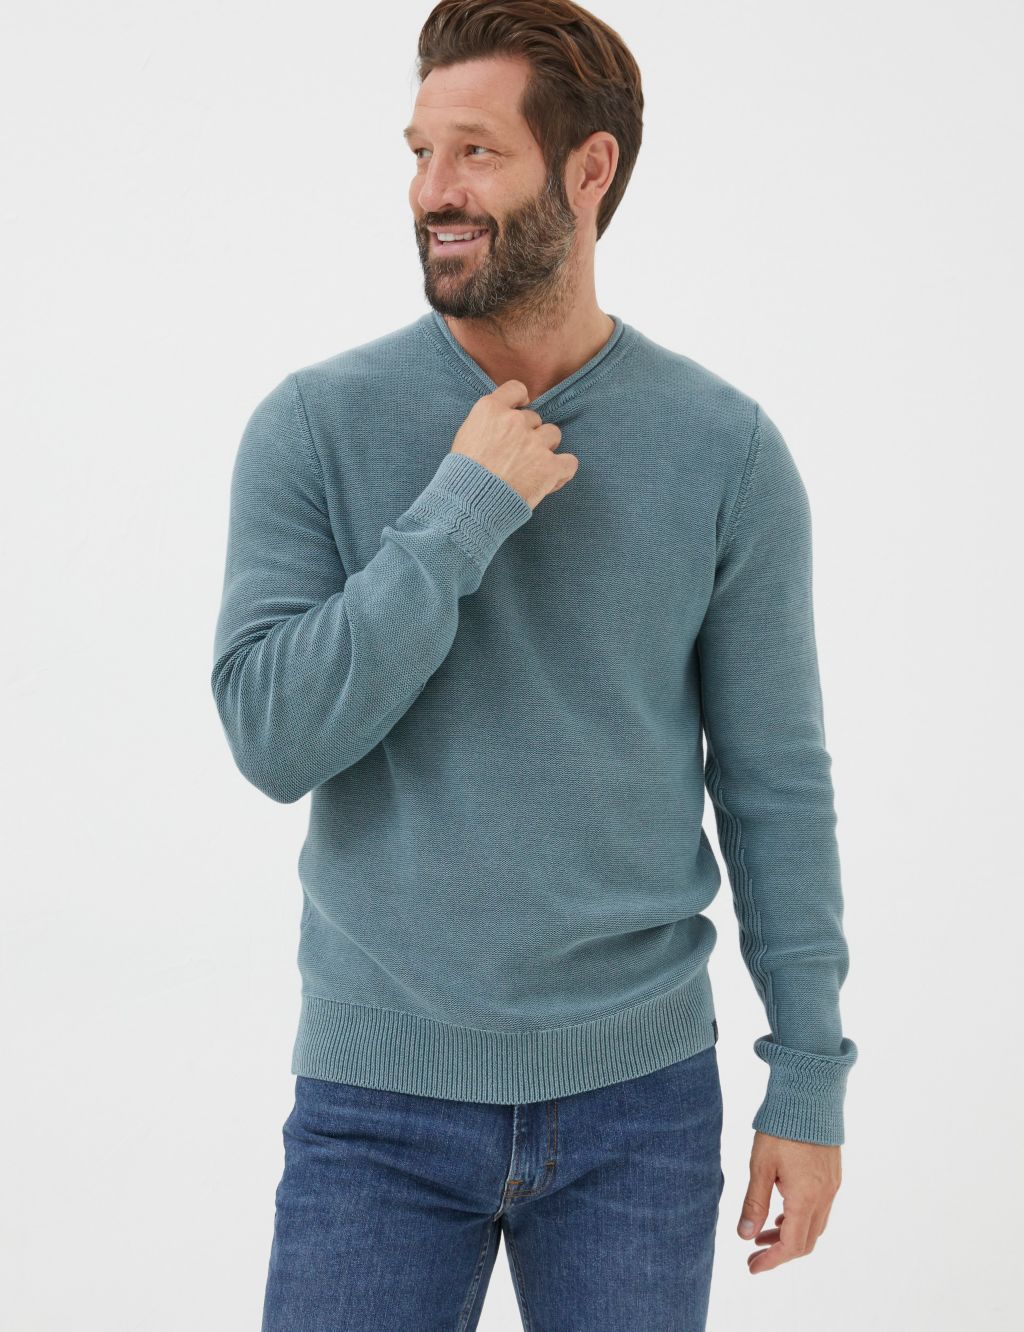 Men’s Green Jumpers | M&S